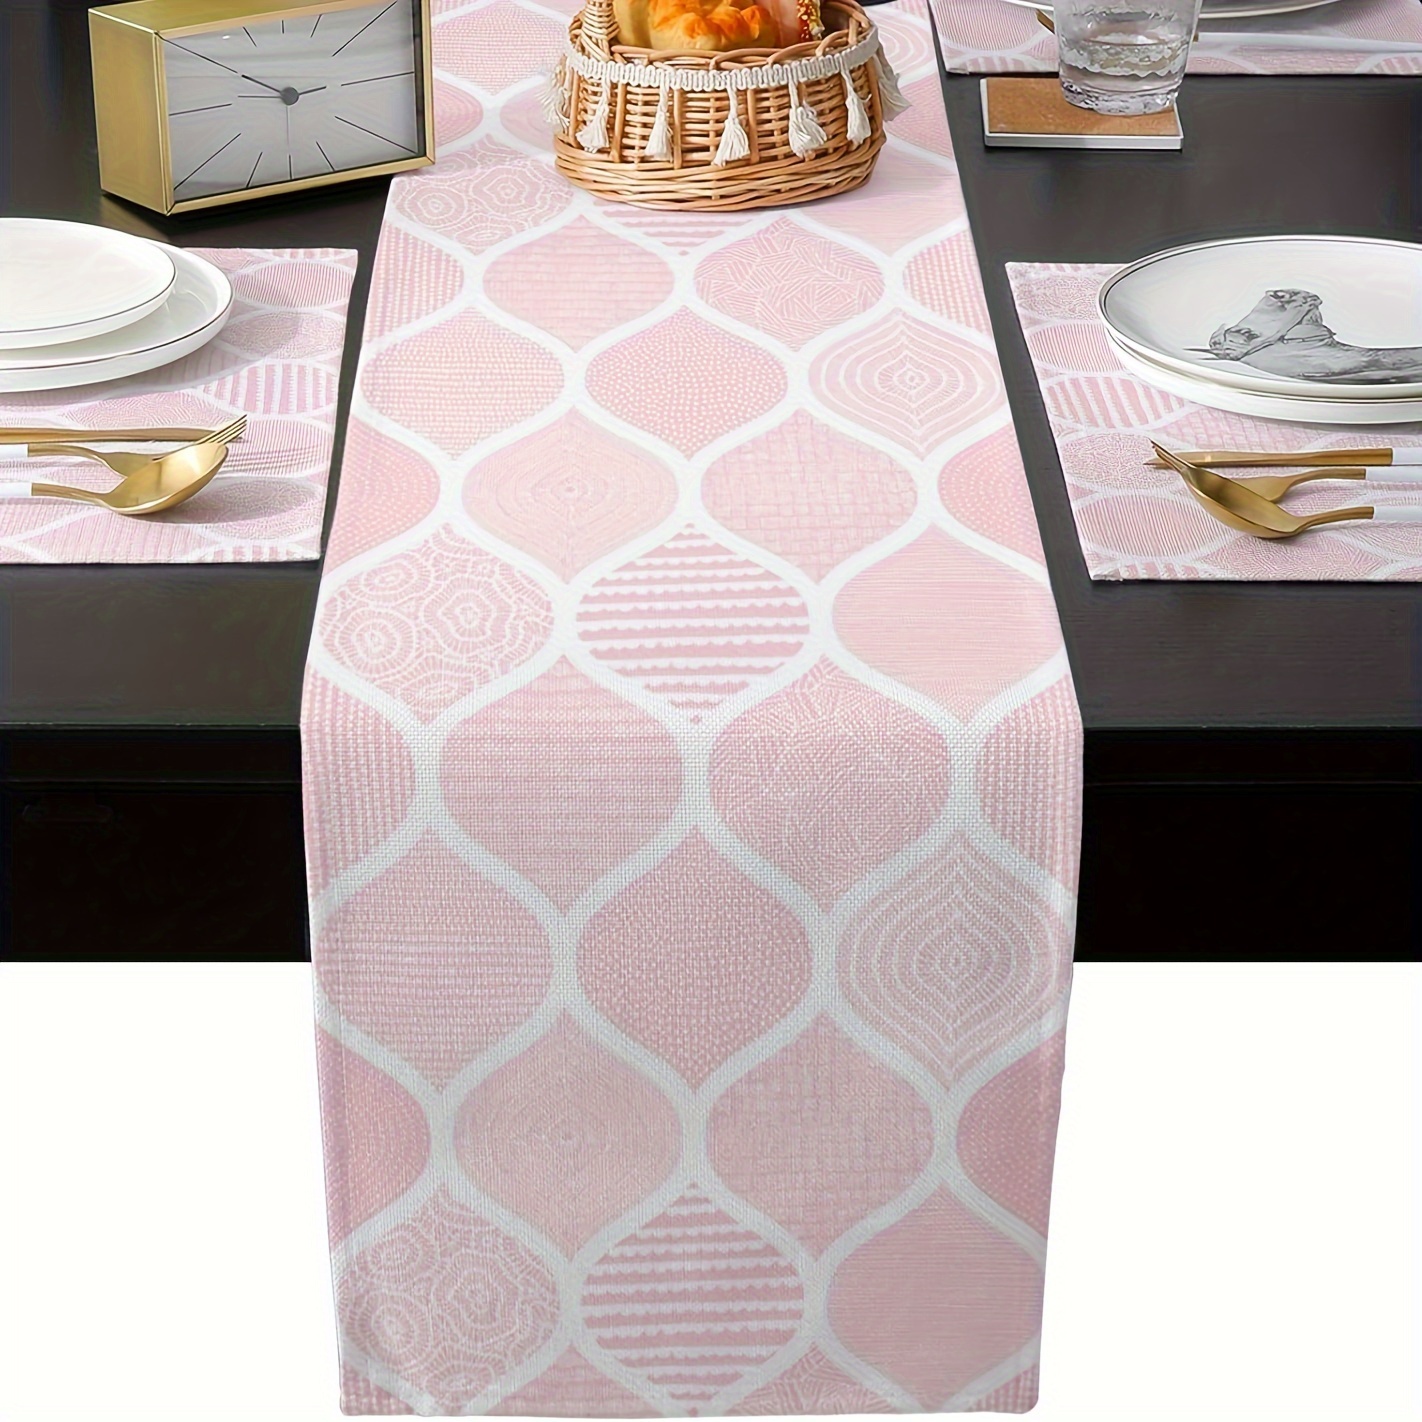 

Elegant Moroccan Pink Linen Table Runner - Geometric Bohemian Design, Perfect For Dining & Living Room Decor, Available In Multiple Sizes (13x48/72/108 Inches)